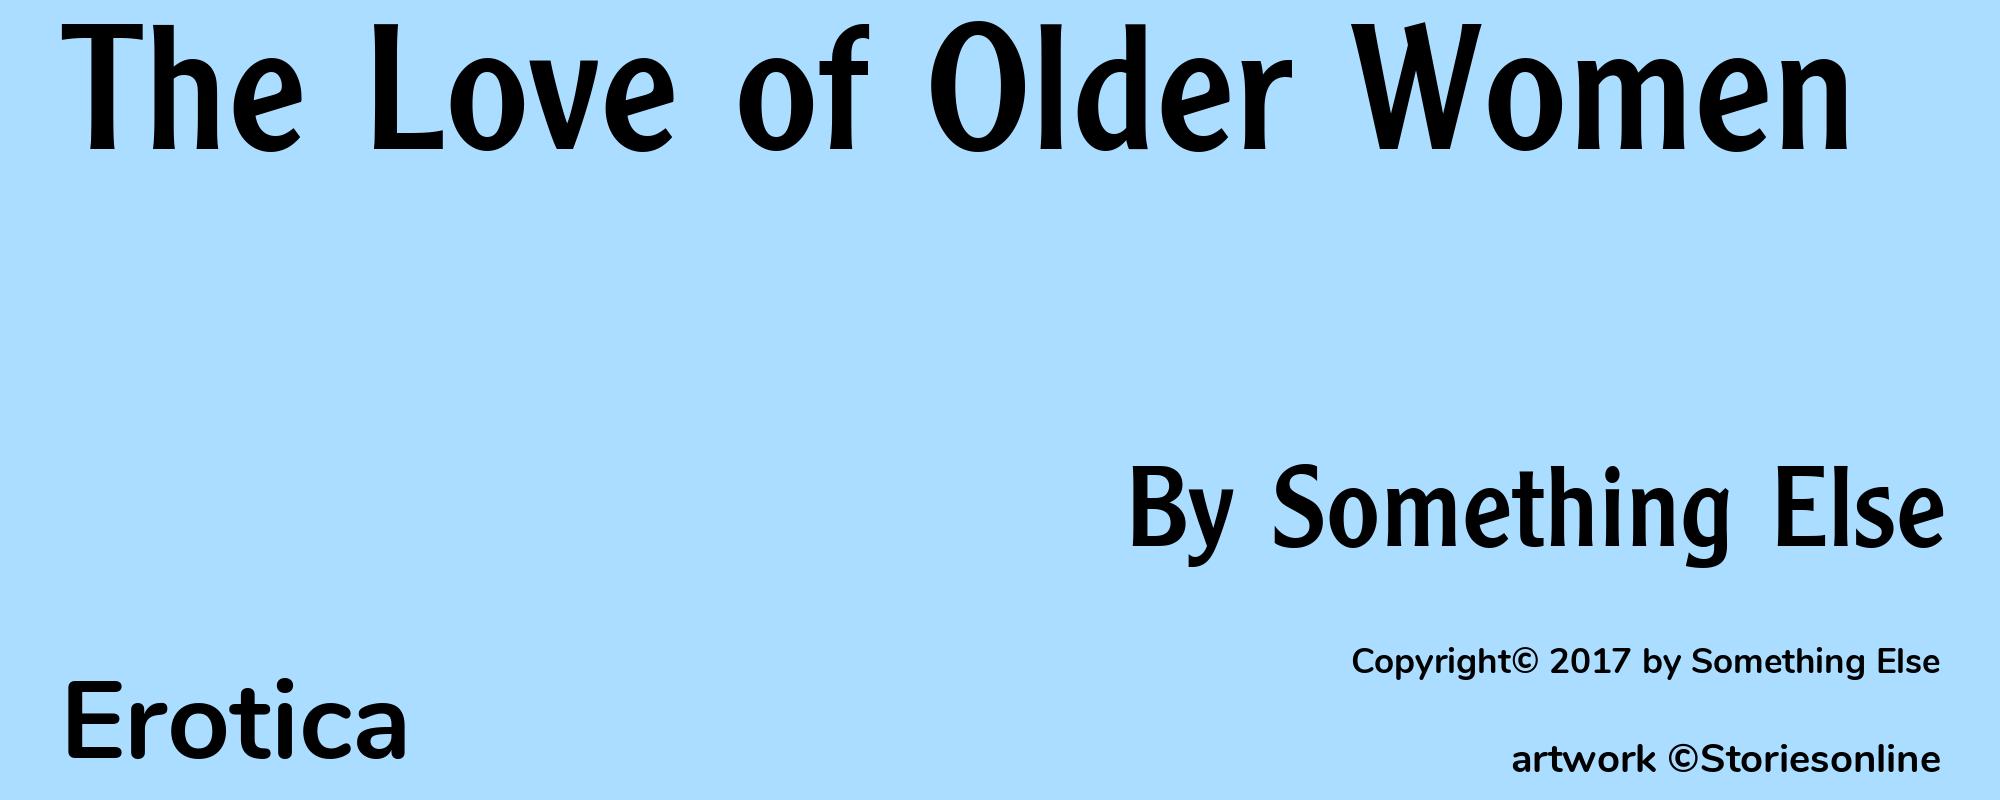 The Love of Older Women - Cover